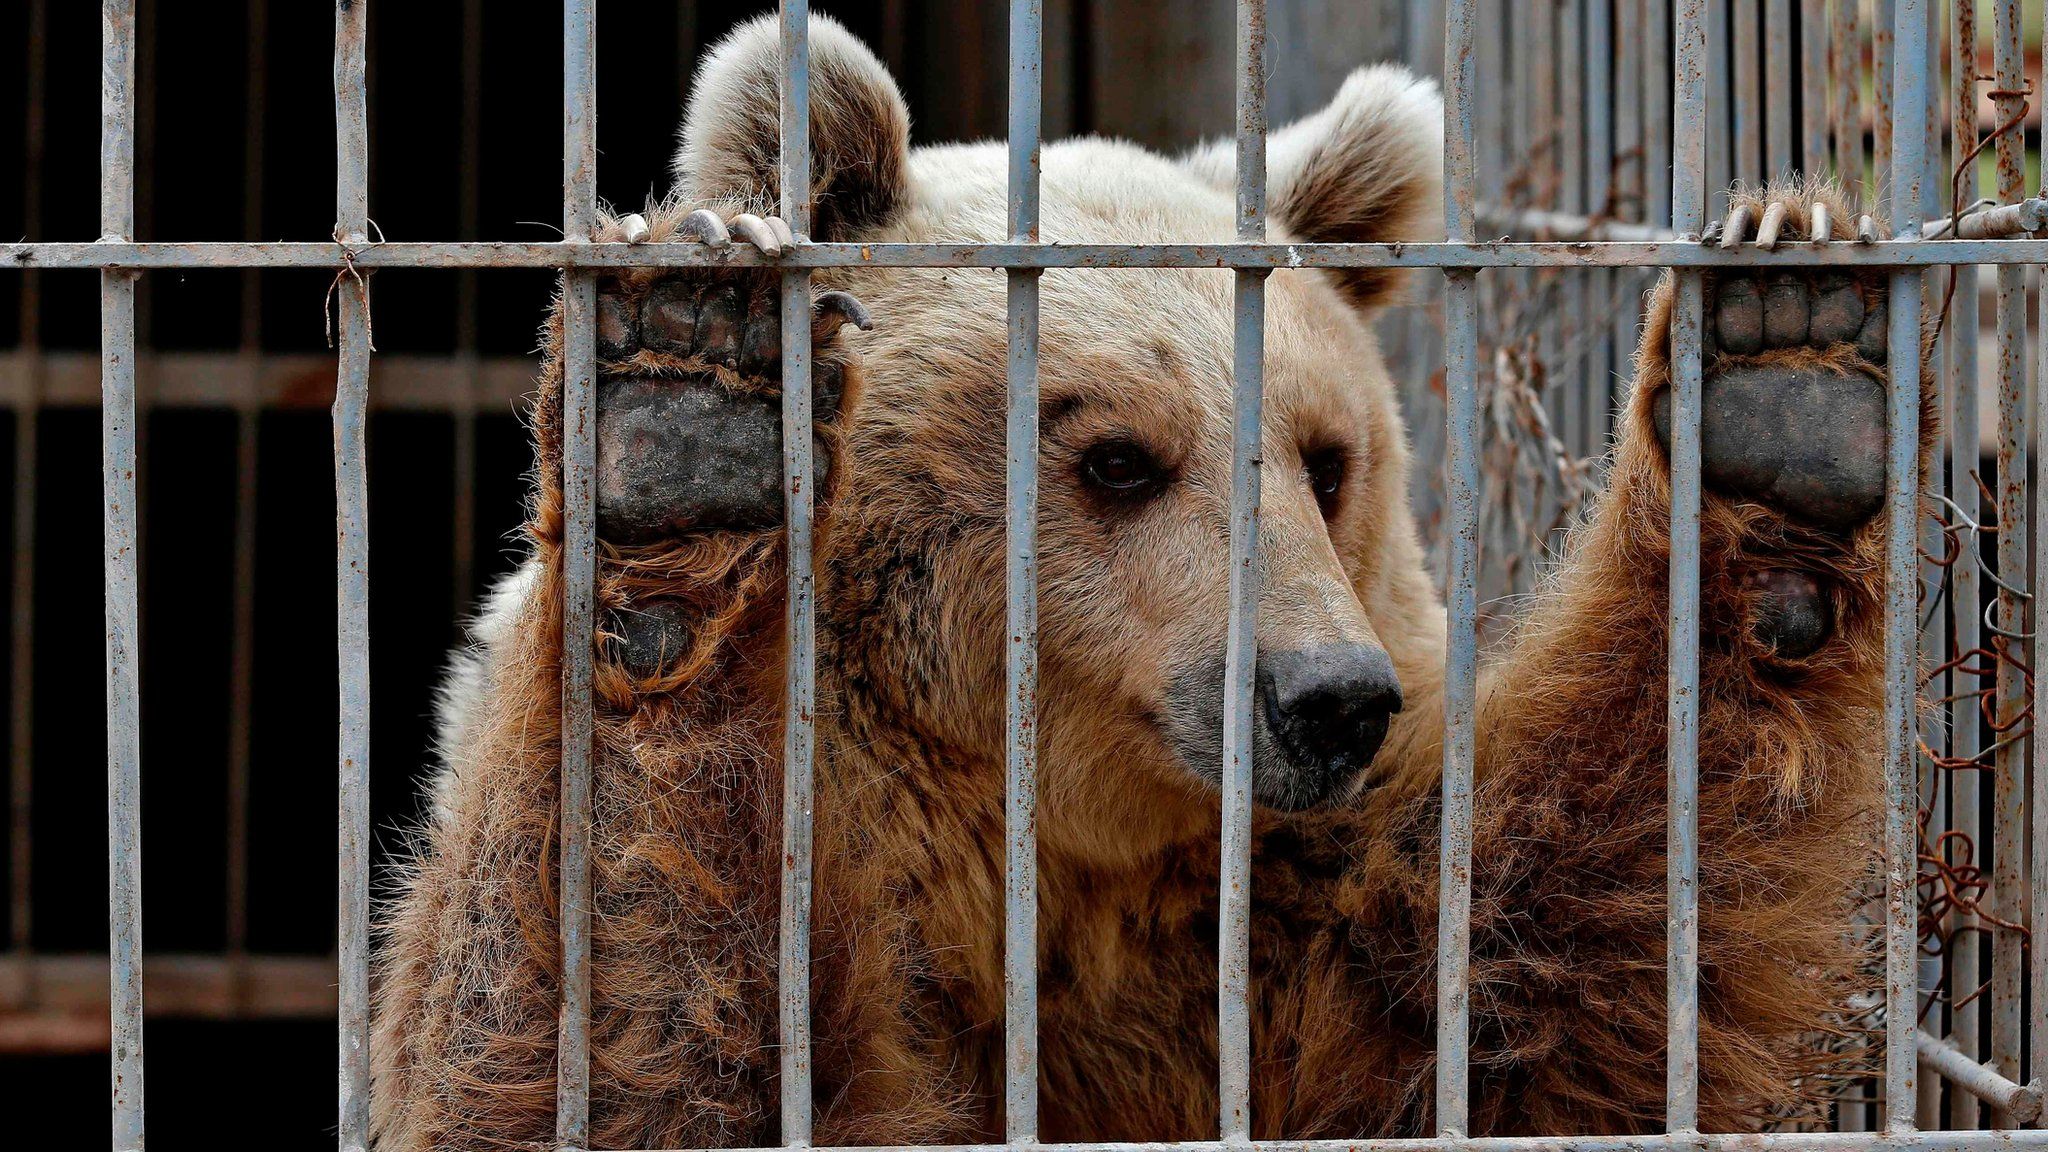 File photo from 28 March 2017 shows Lula, an abandoned bear, in a cage at a zoo in Mosul